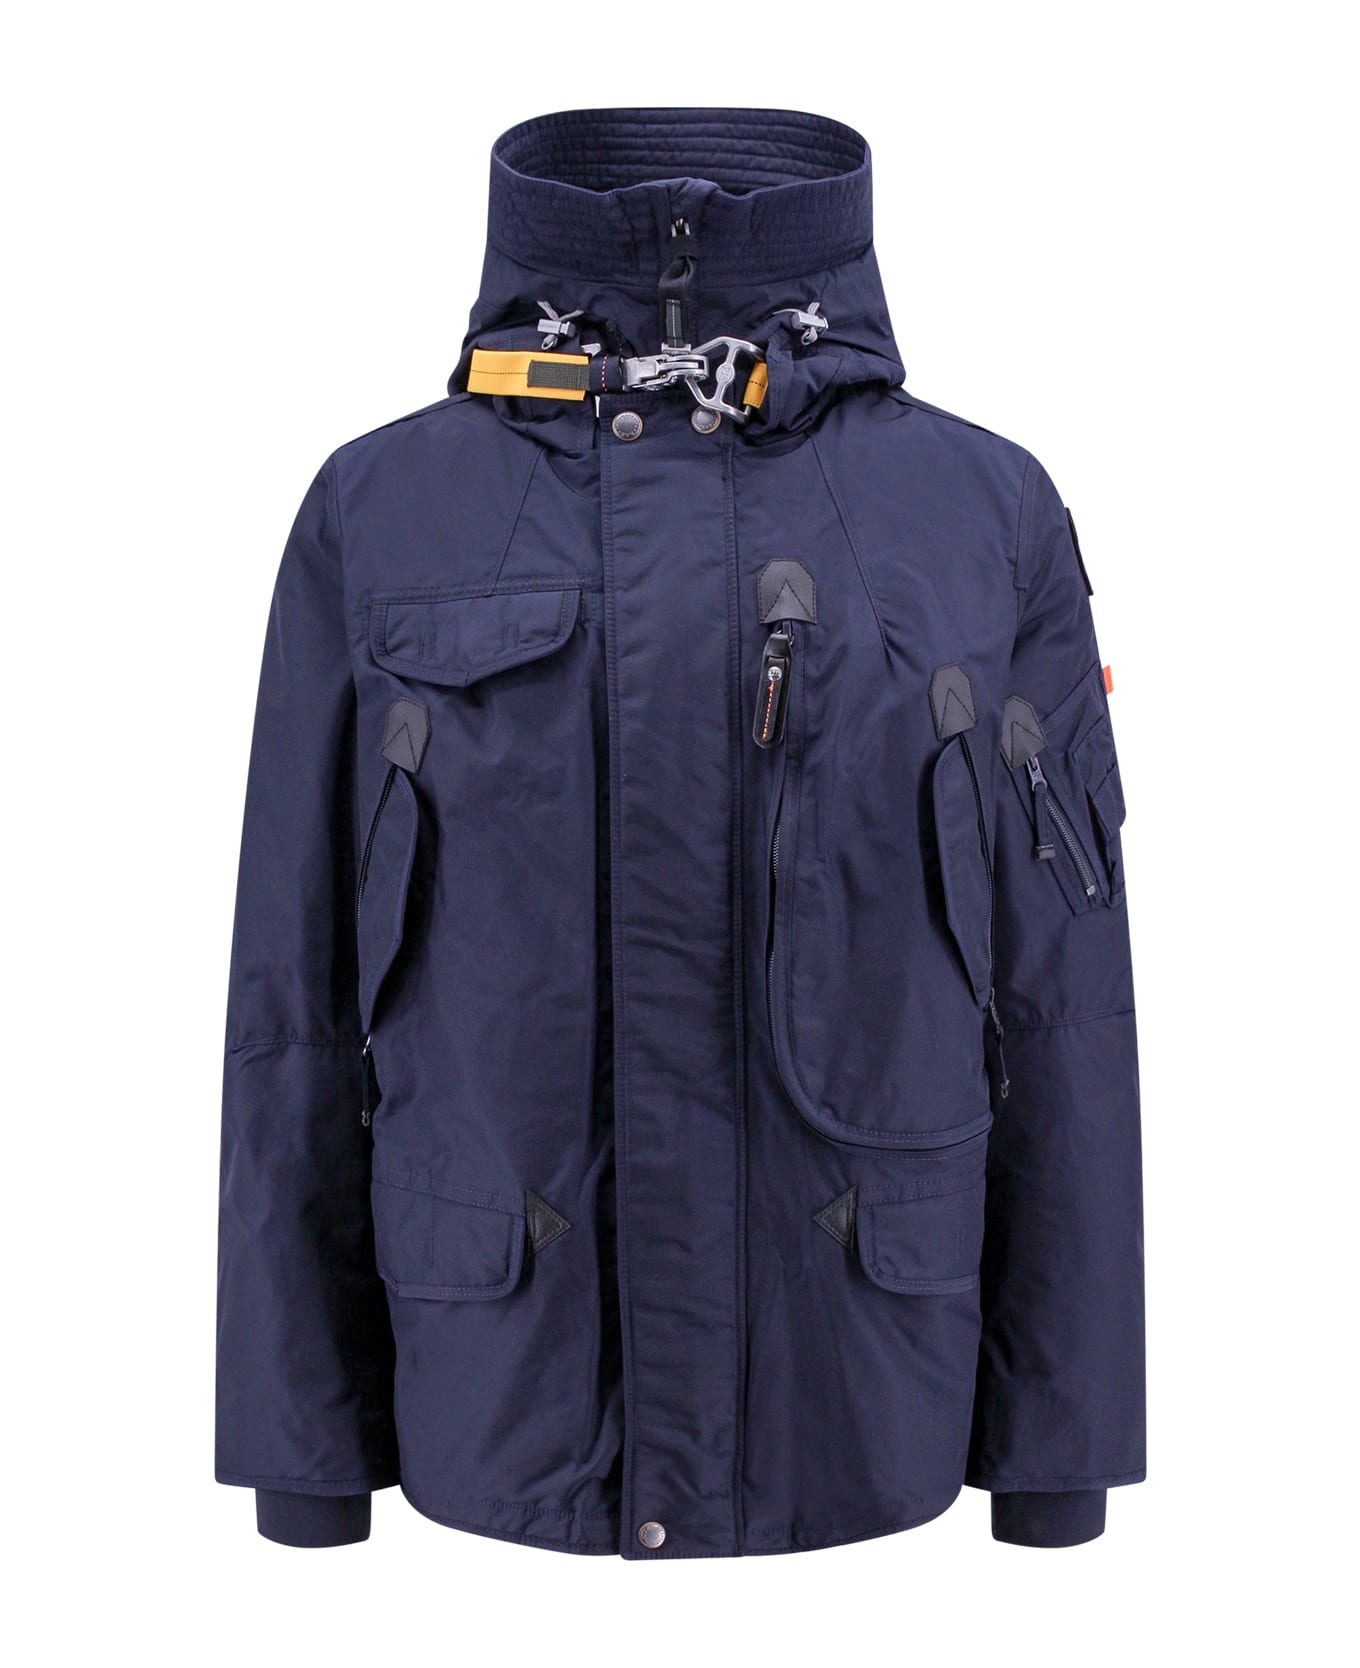 Parajumpers Right Hand Jacket - Blue ジャケット